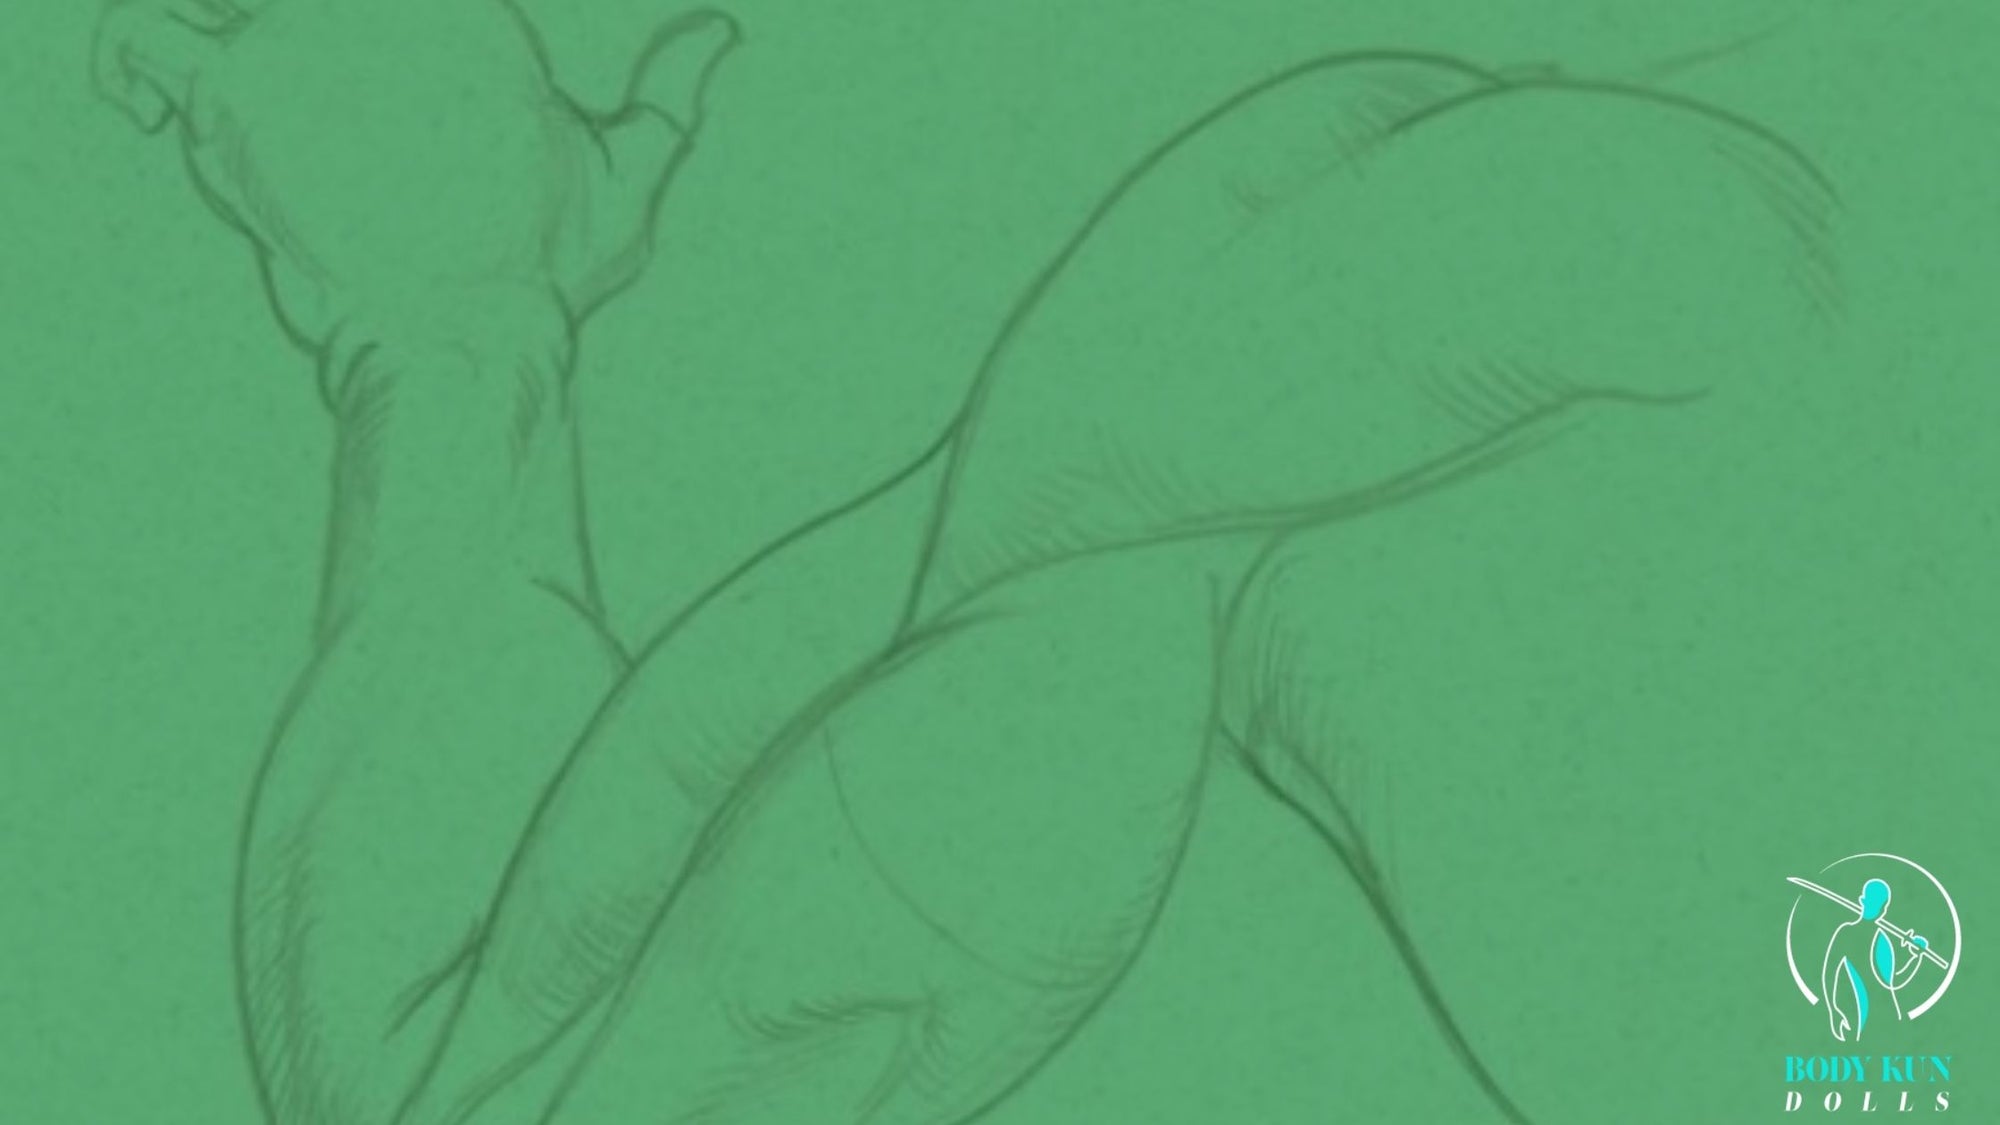 How To Get Better At Drawing Anatomy banner